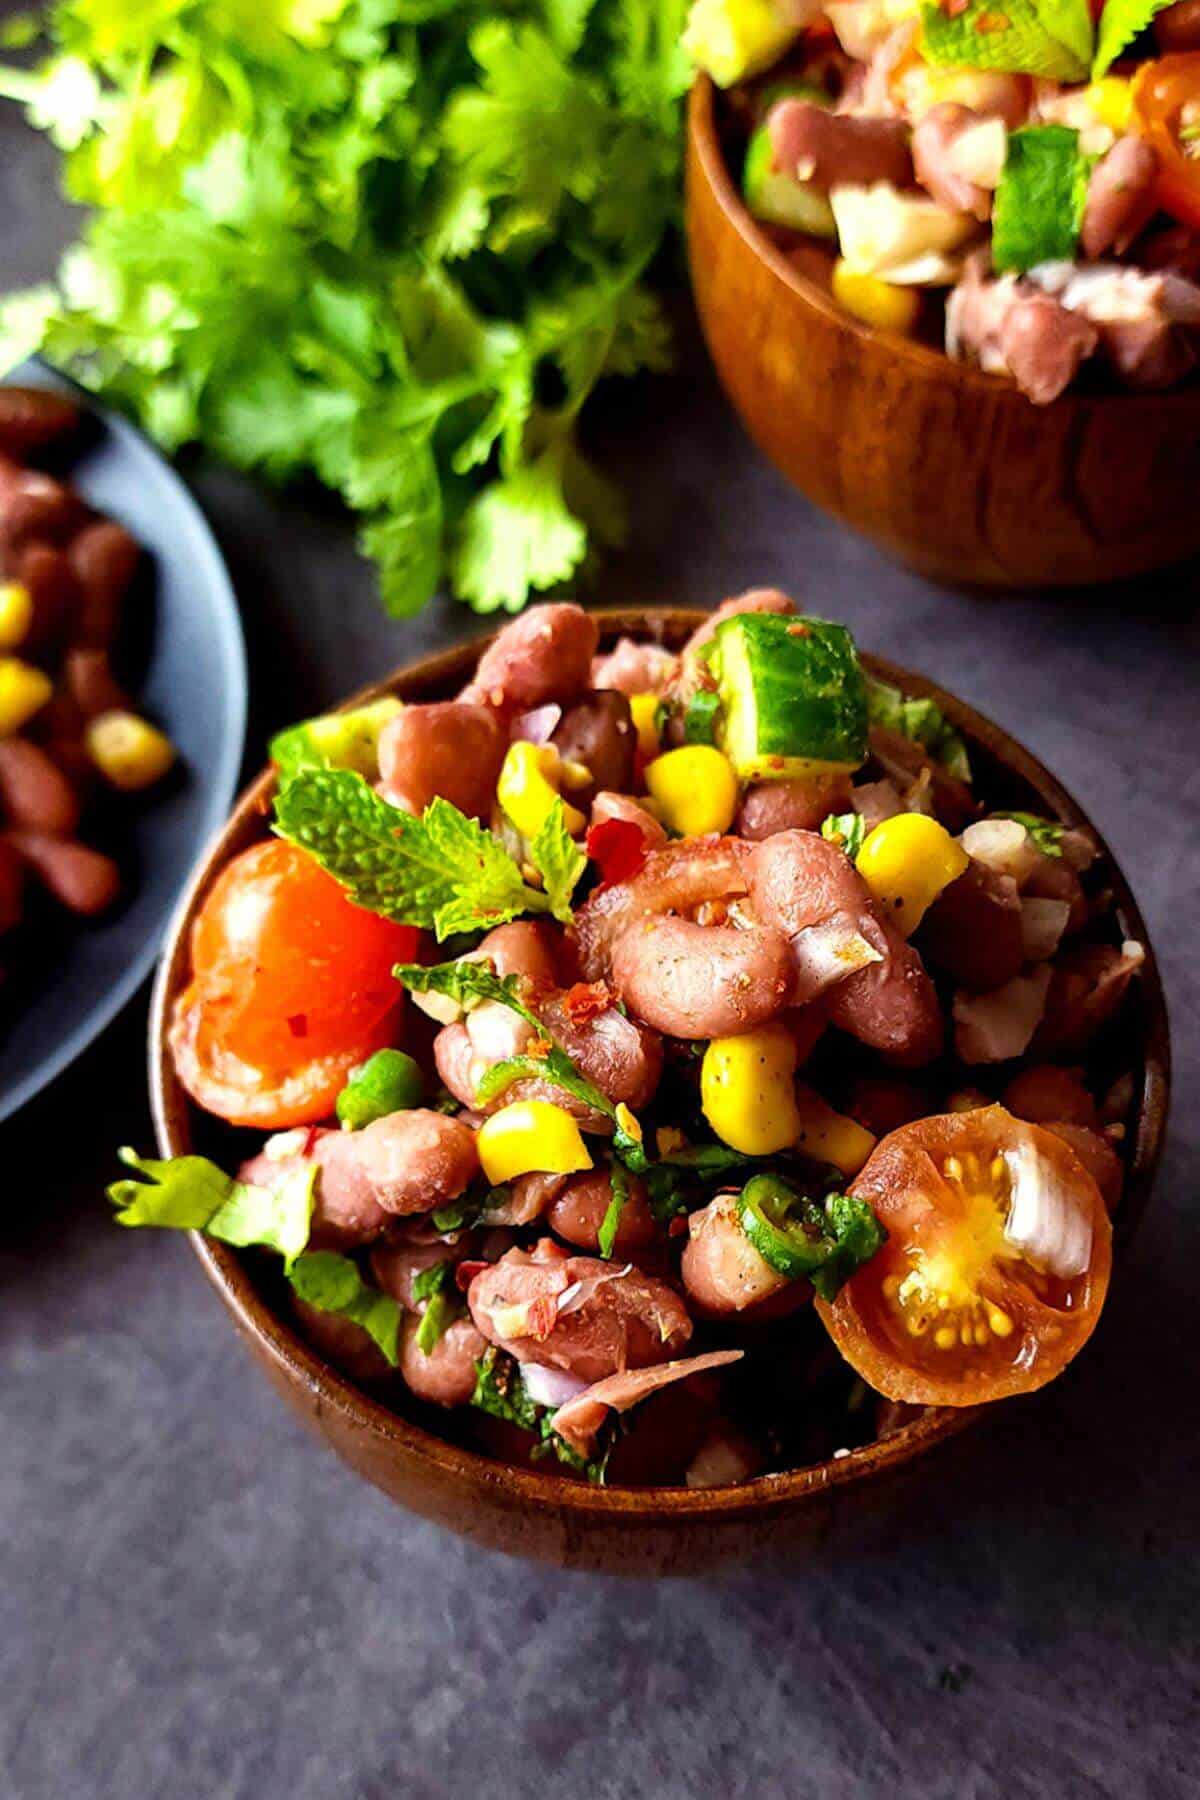 Red kidney bean salad served in a wooden bowl with another salad bowl and fresh herbs in the background.